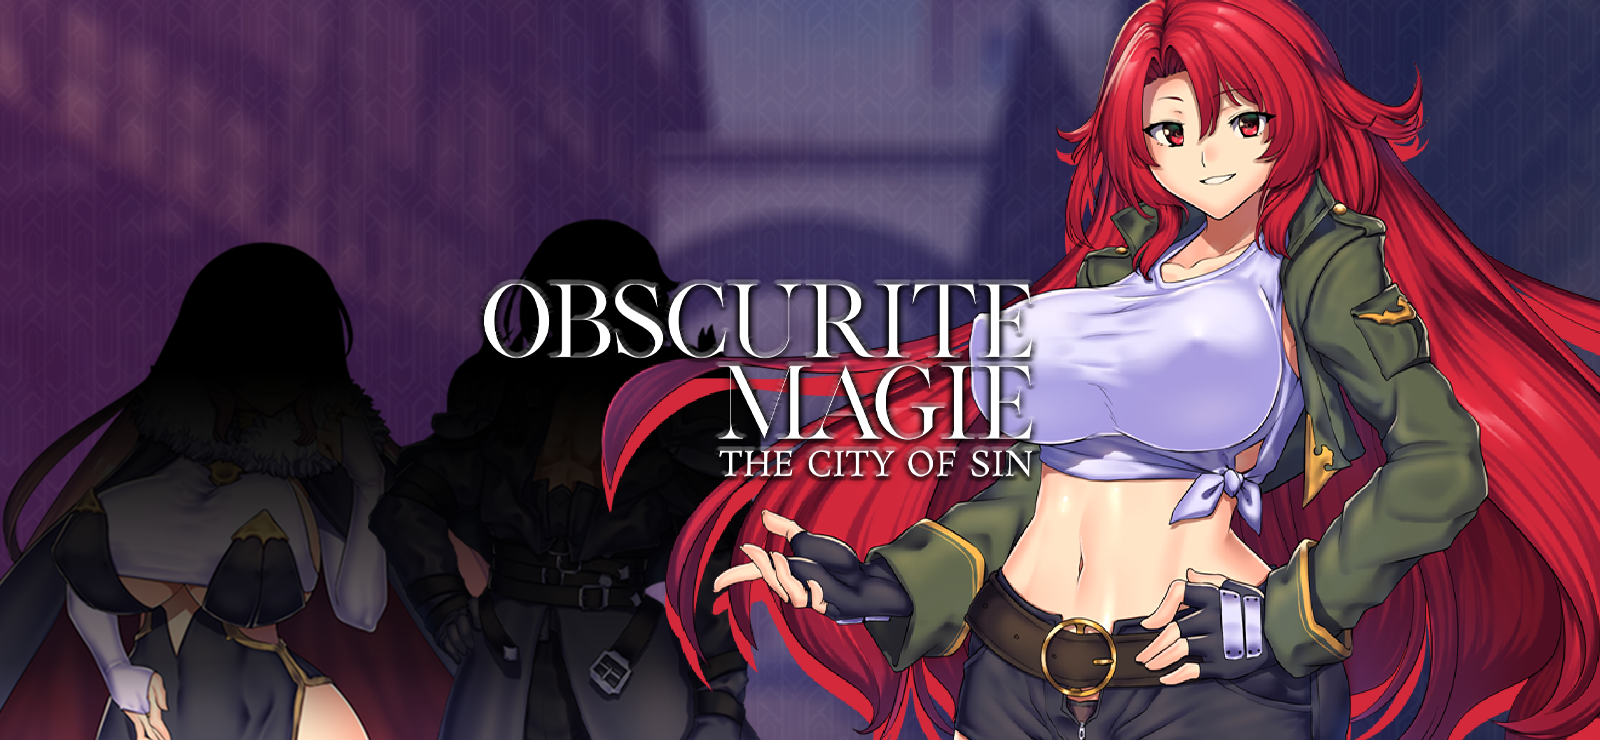 Obscurite Magie: The City Of Sin